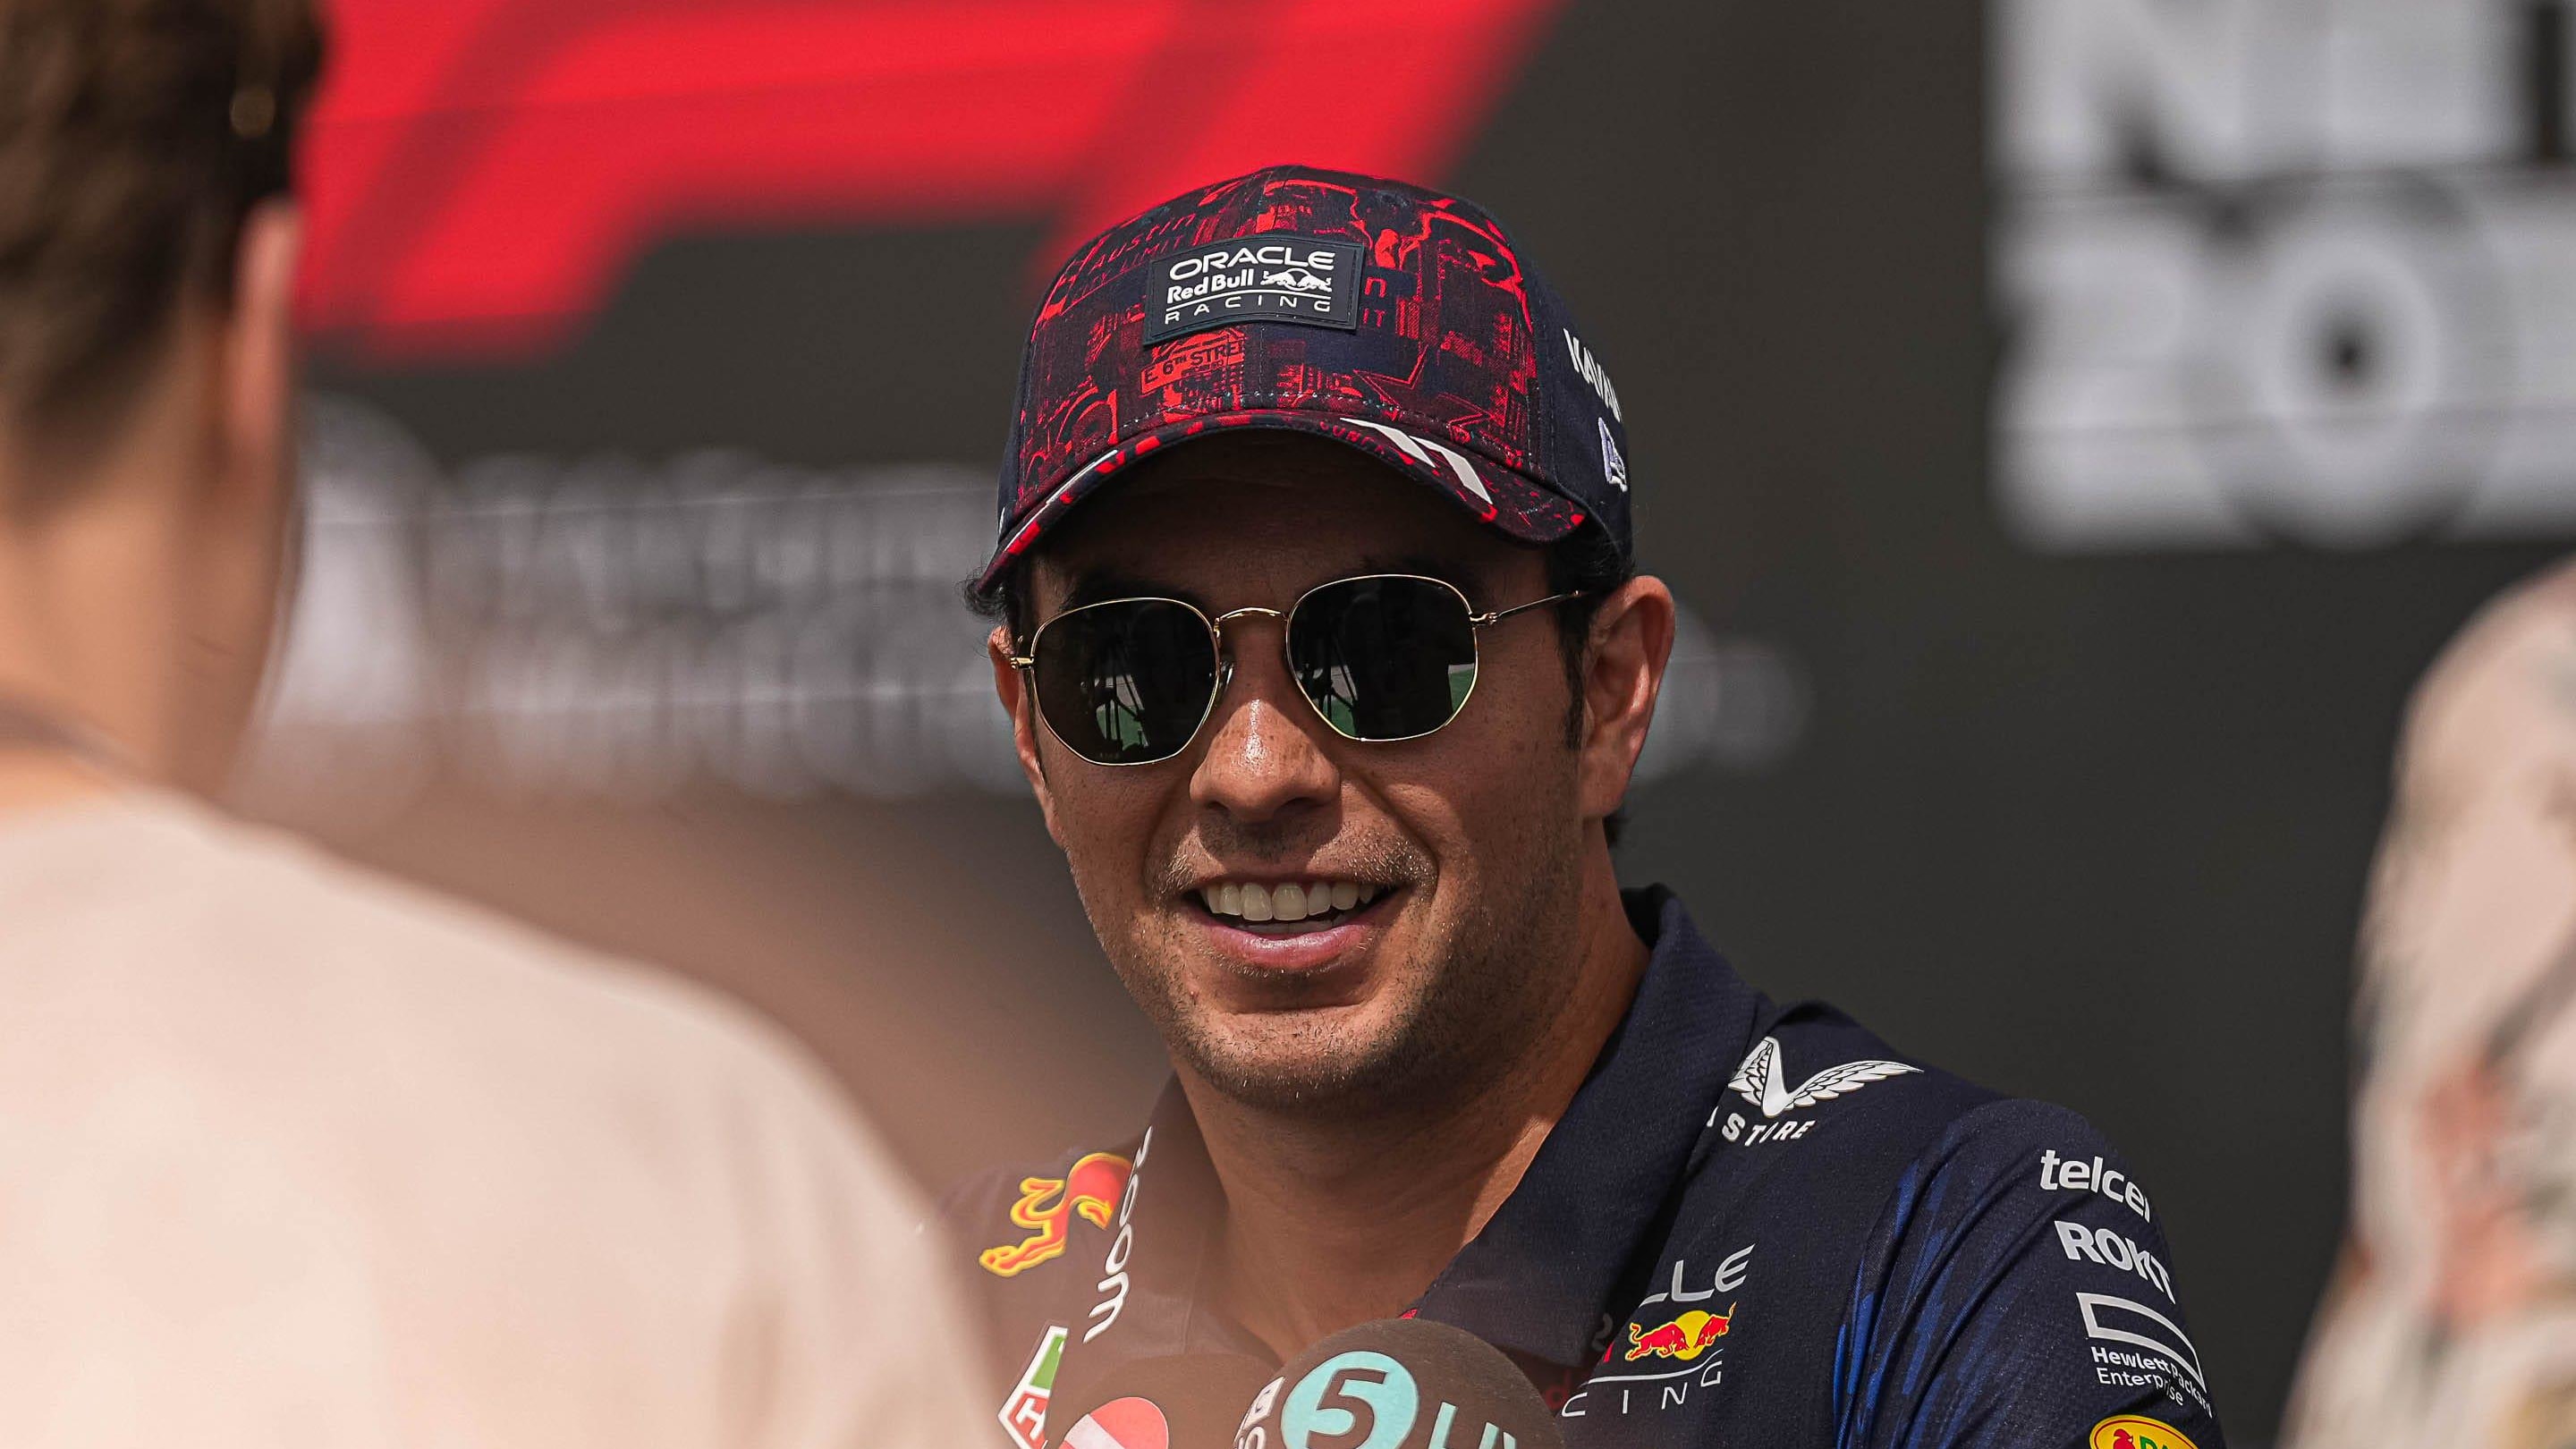 Oracle Red Bull driver Sergio Perez is interviewed in the paddock area at Circuit of Americas on